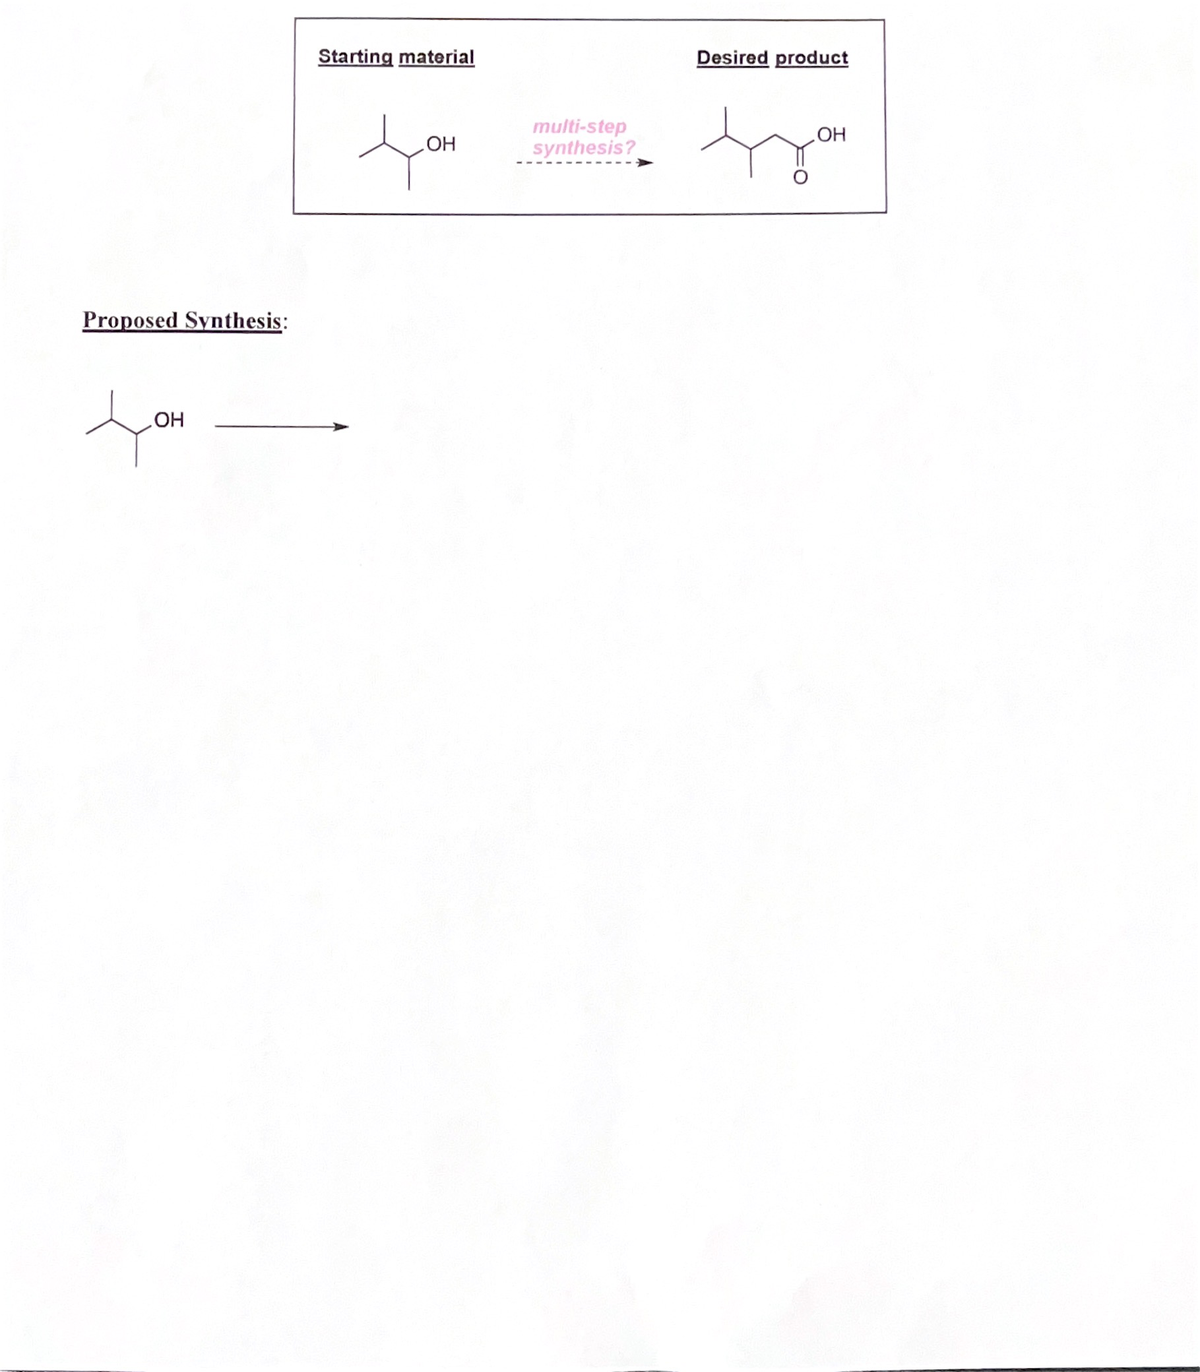 Starting material
Desired product
multi-step
synthesis?
HO
HO
Proposed Synthesis:
HO
